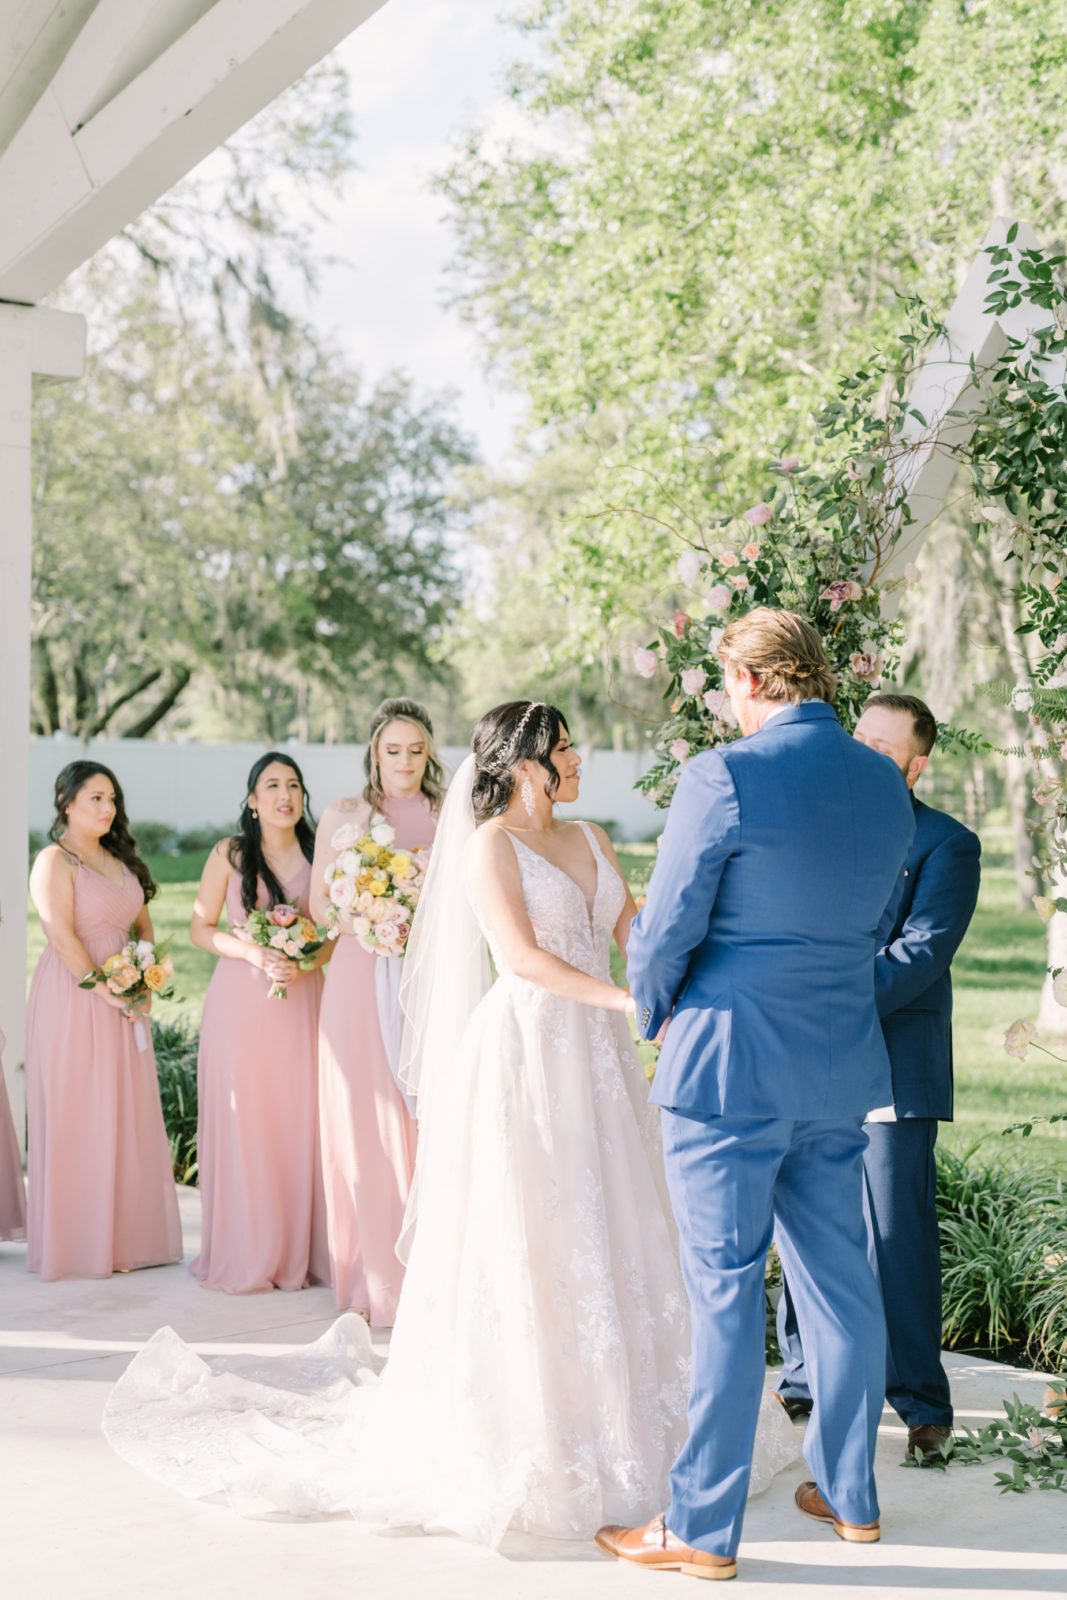 Warm sunshine wedding day with bride and groom holding hands at the altar by Christina Elliott Photography. sunshine altar portrait #ChristinaElliottPhotography #ChristinaElliottWeddings #Houstonwedding #TheSpringsVenue #EastHoustonweddings #sayIdo